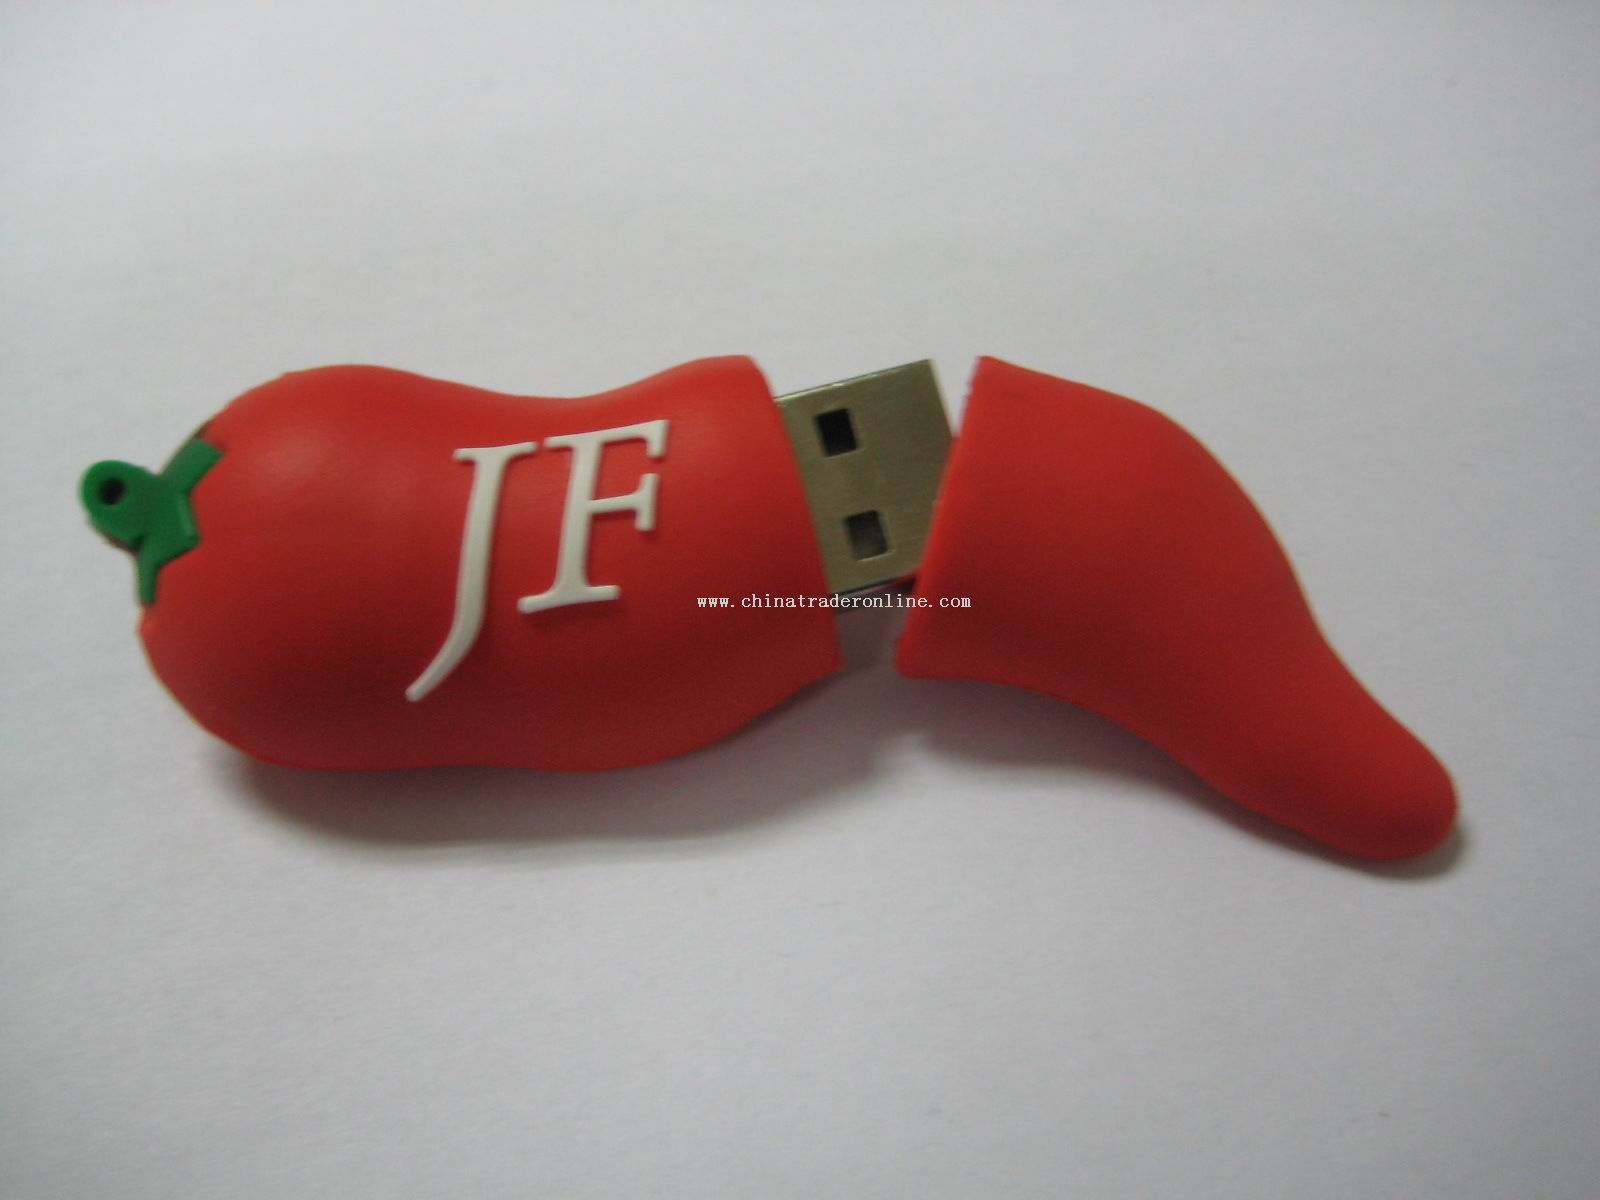 Red capsicum usb drive from China